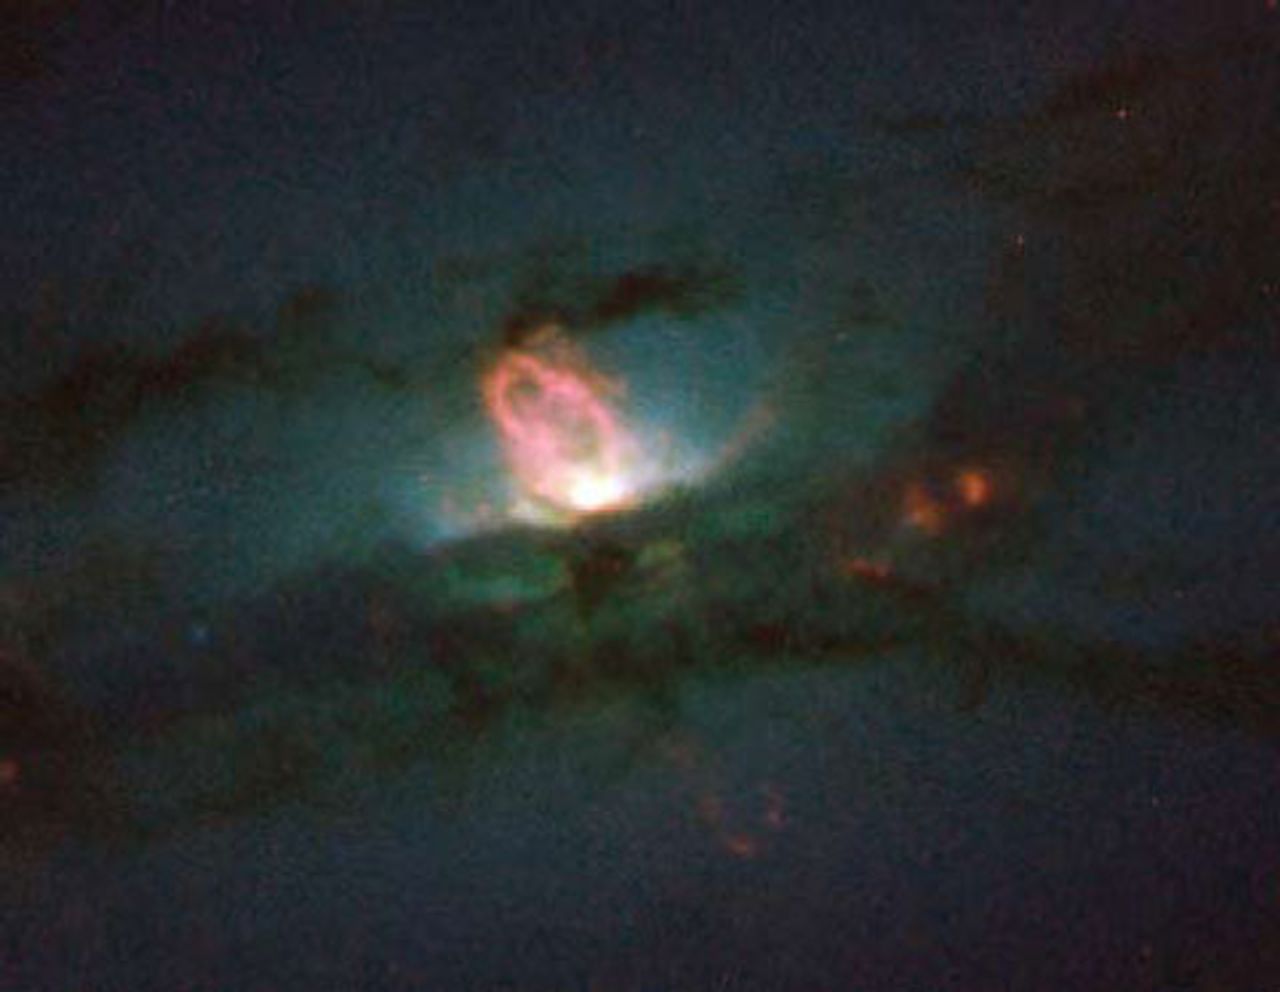 A black hole at the center of galaxy NGC 4436 expels a gas bubble hundreds of light years across